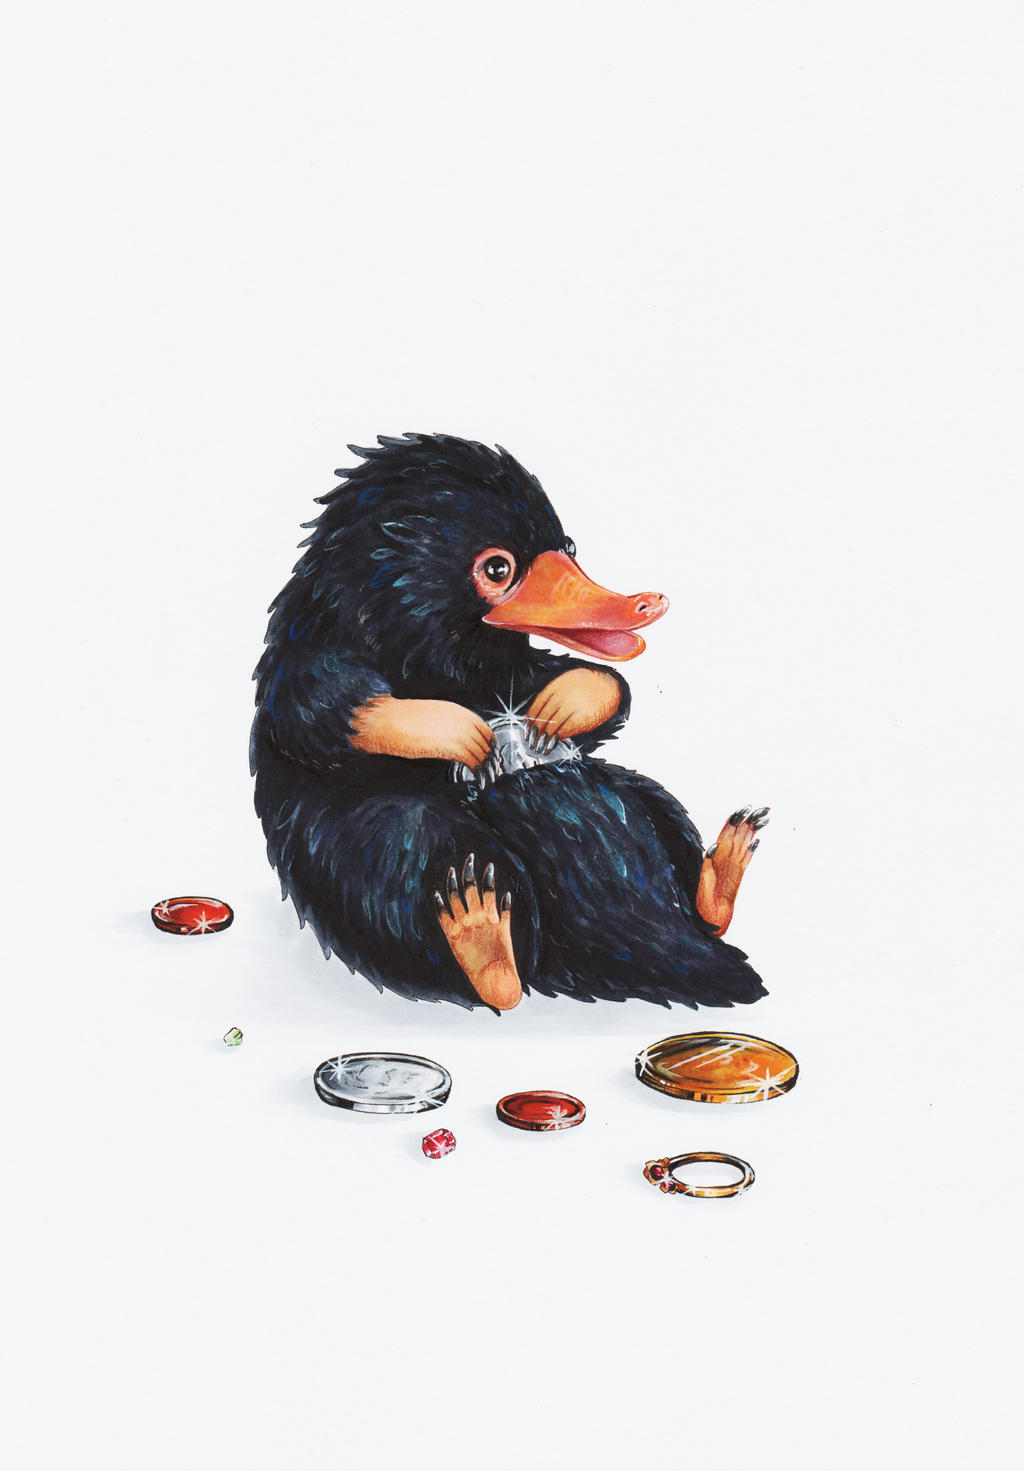 Niffler - Fantastic Beasts and where to find them